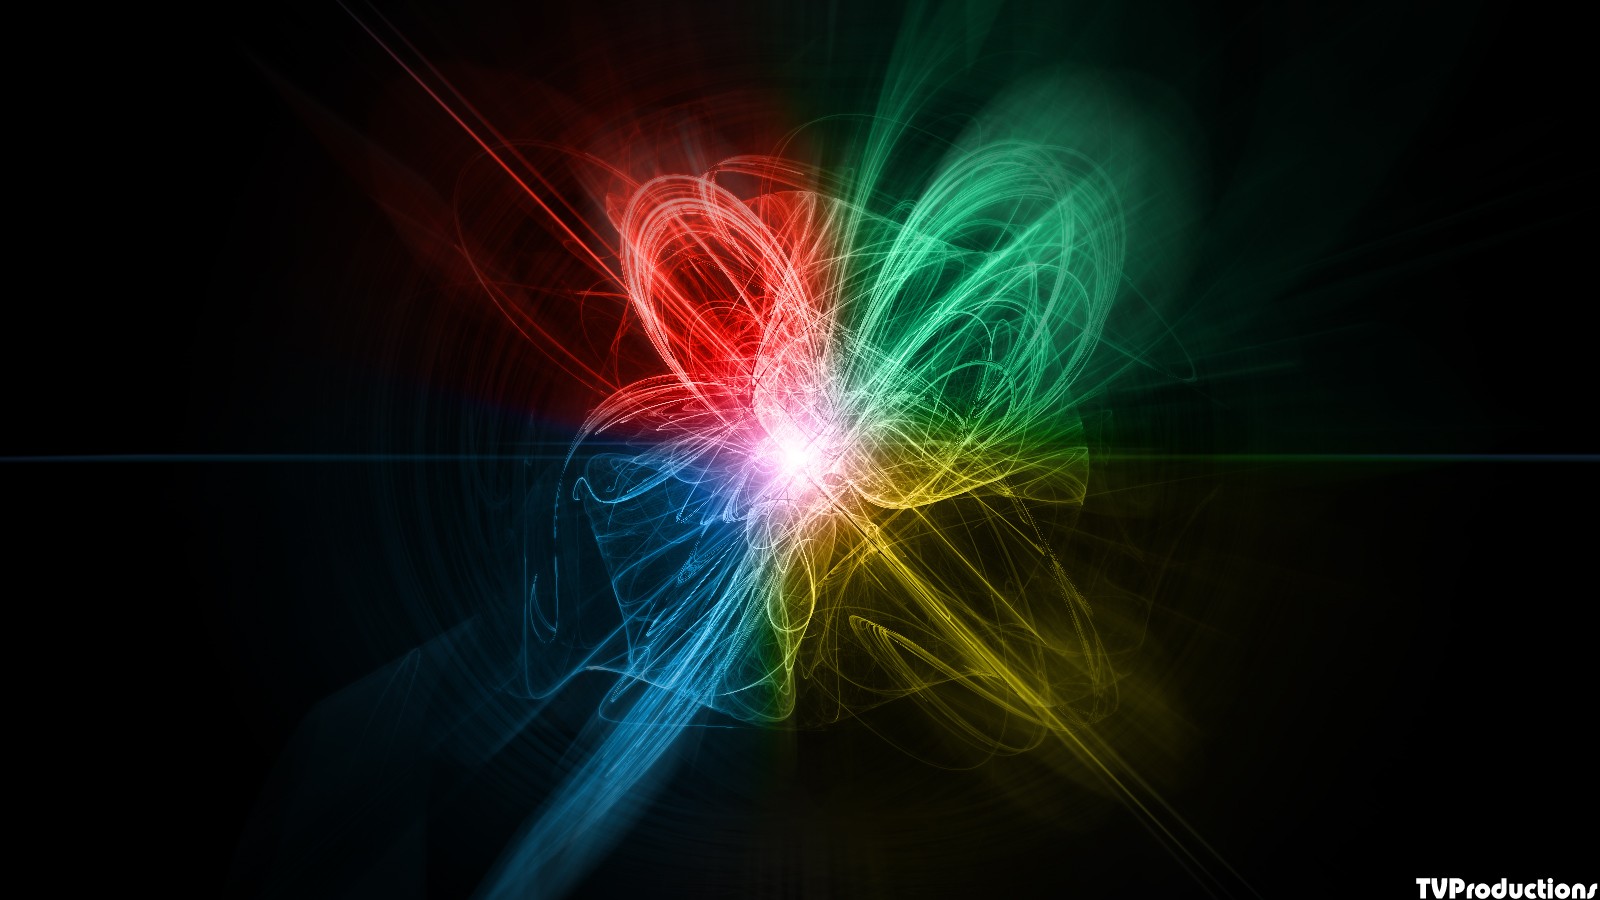  Wallpaper 1600x900 Abstract Colorful Colored Rainbows Neon